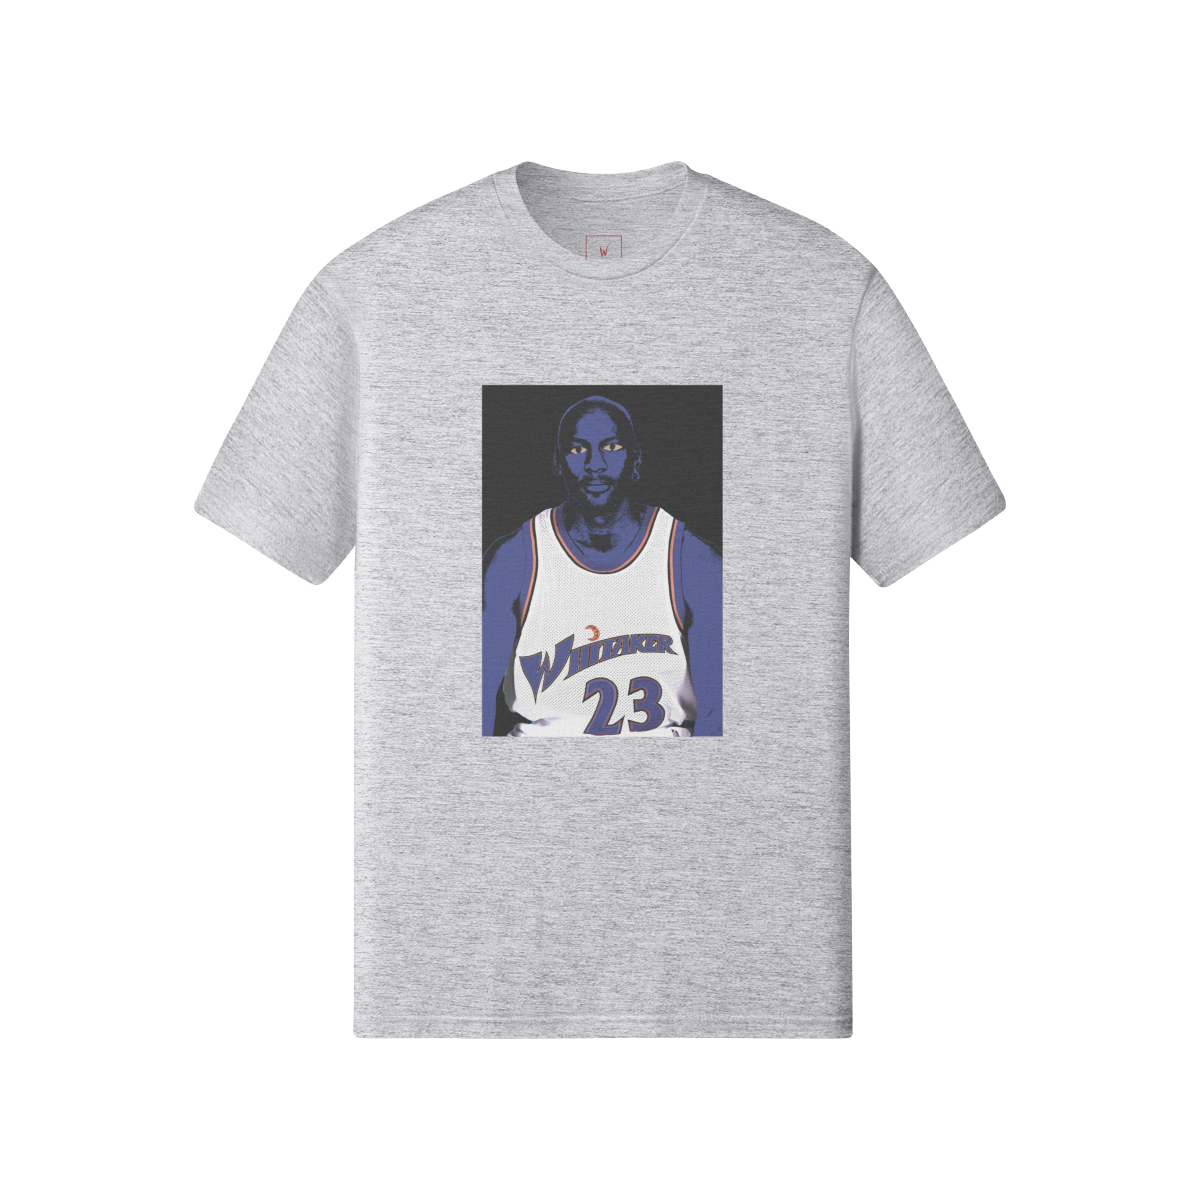 Wizards T (Classic Fit)